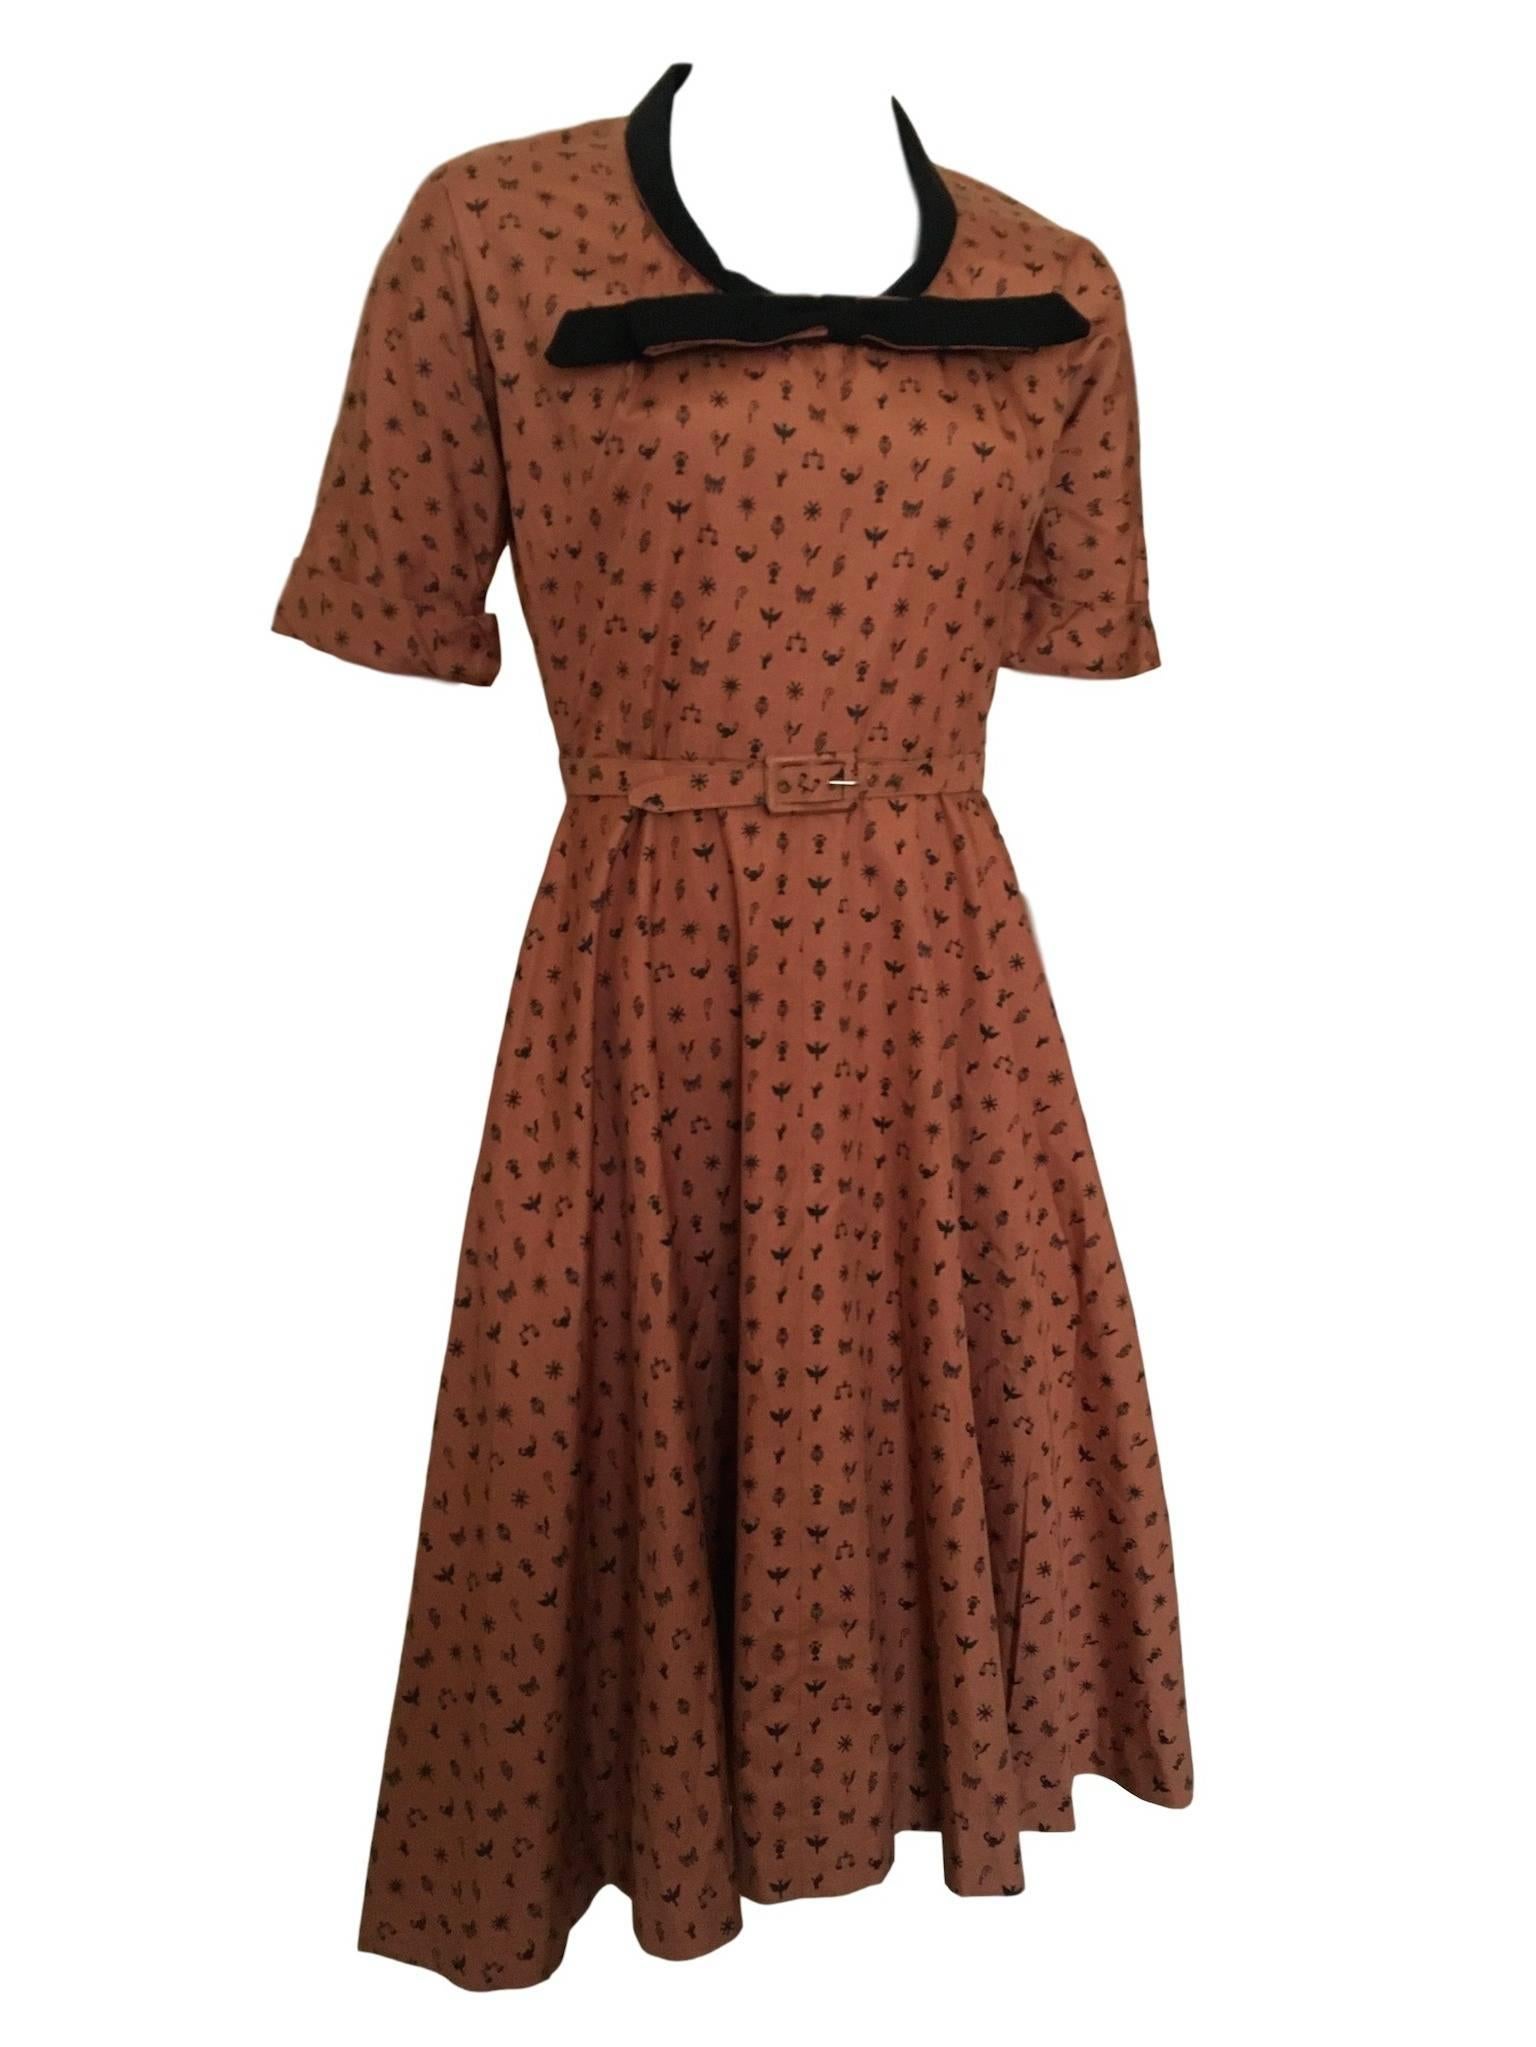 Horrockses cotton vintage 1950s dress, with novelty print of zodiac and other images. A deep orange/bronze colour with black print, a scooped neck line with bow feature, fitted waist band, flared skirt and has original belt.

Size 8/10 measures 18